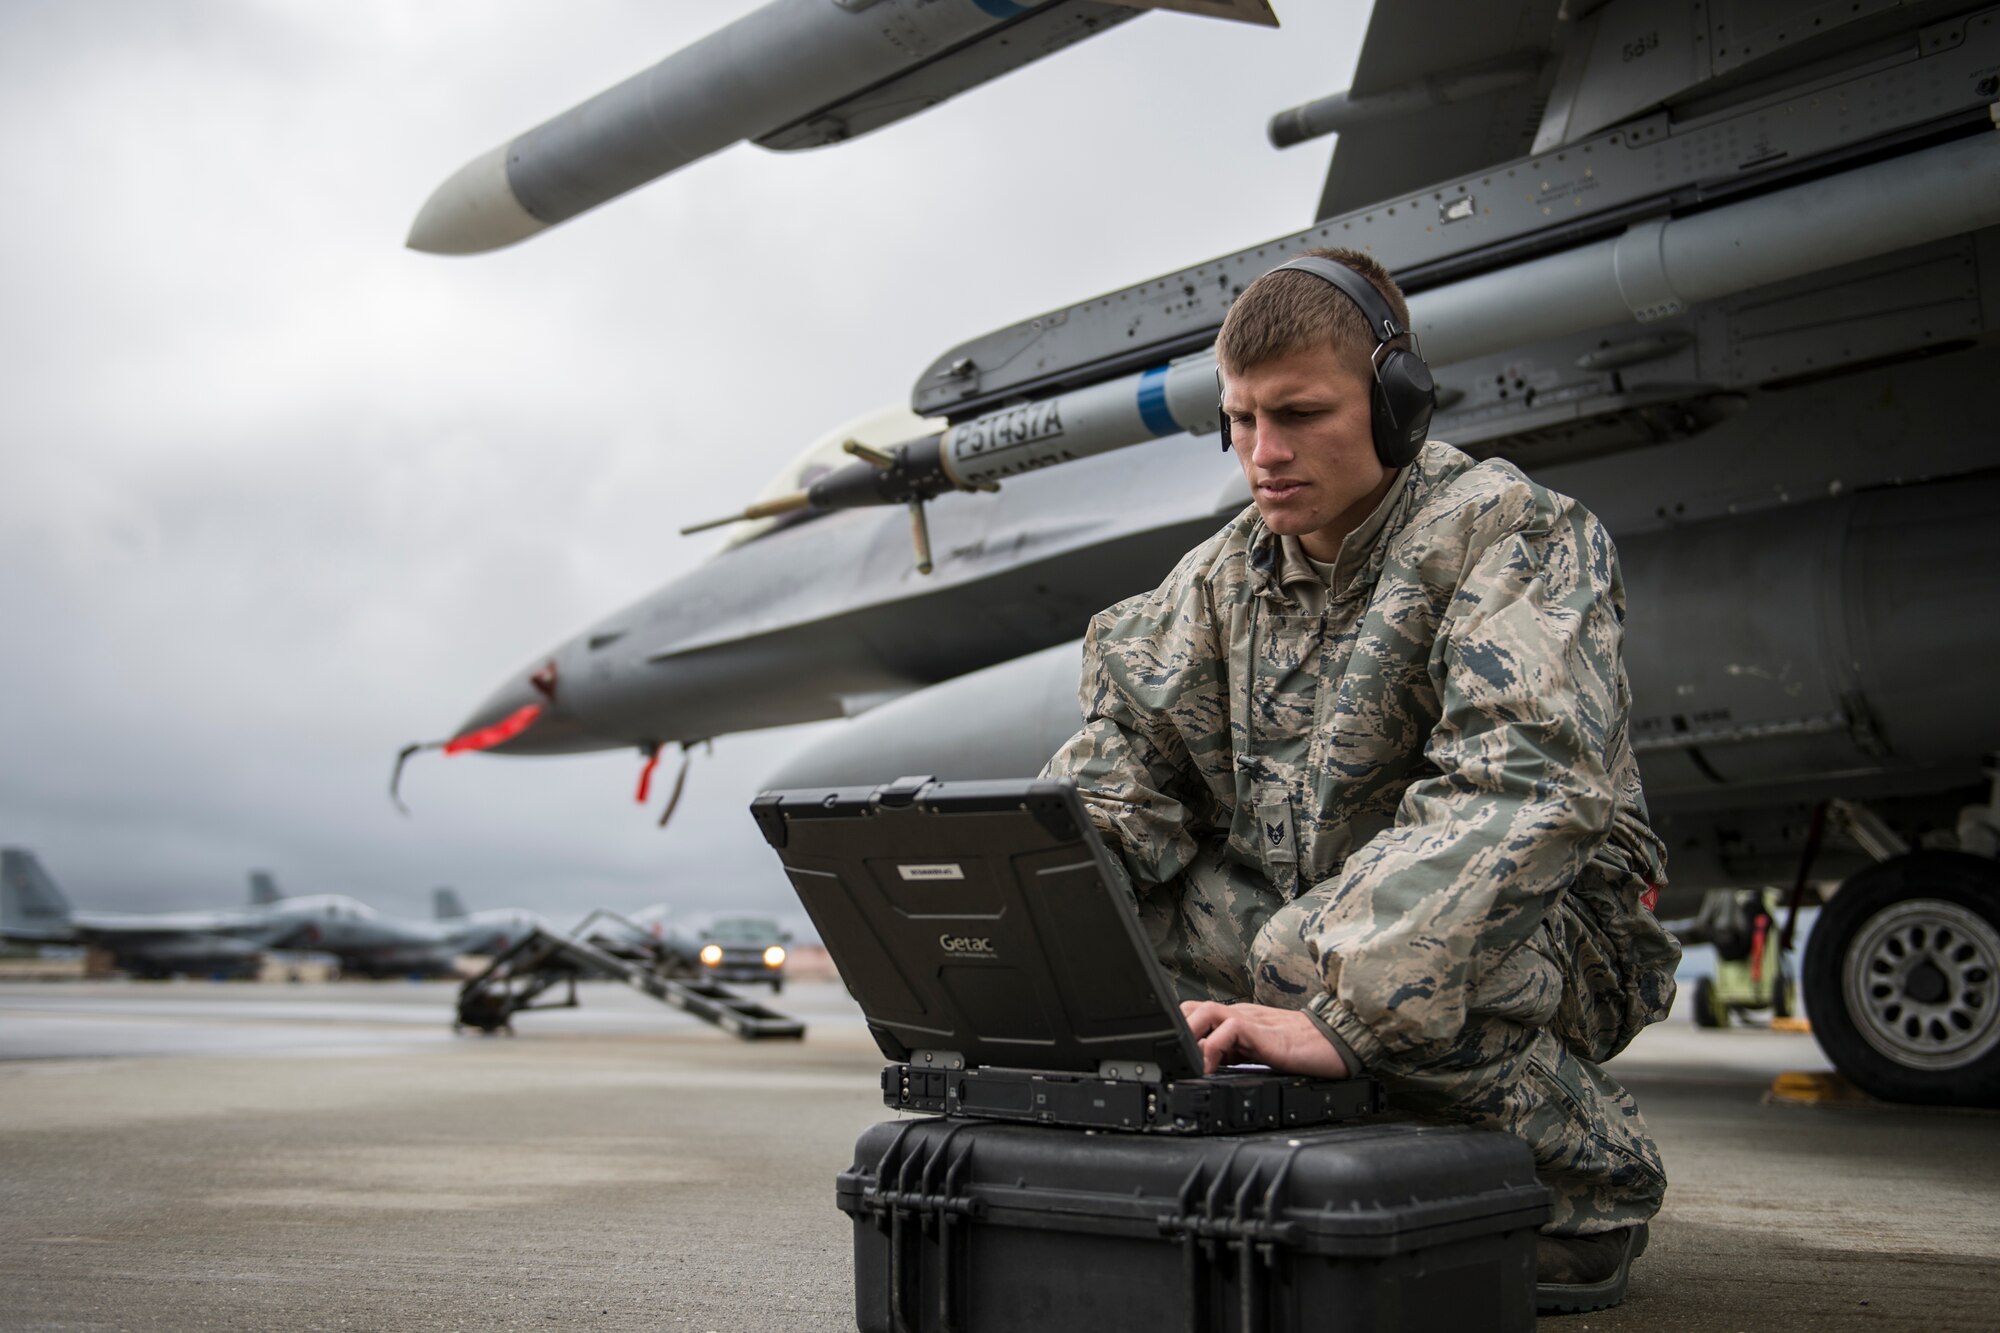 U.S. Air Force Staff Sgt. Zackery Coder, 36th Aircraft Maintenance Unit crew chief assigned to Osan Air Base, South Korea, checks computer data during RED FLAG-Alaska 14-2, June 19, 2014, Eielson Air Force Base, Alaska. Coder ensured the F-16 Fighting Falcon was ready for the next sortie. (U.S. Air Force photo by Senior Airman Peter Reft/Released)